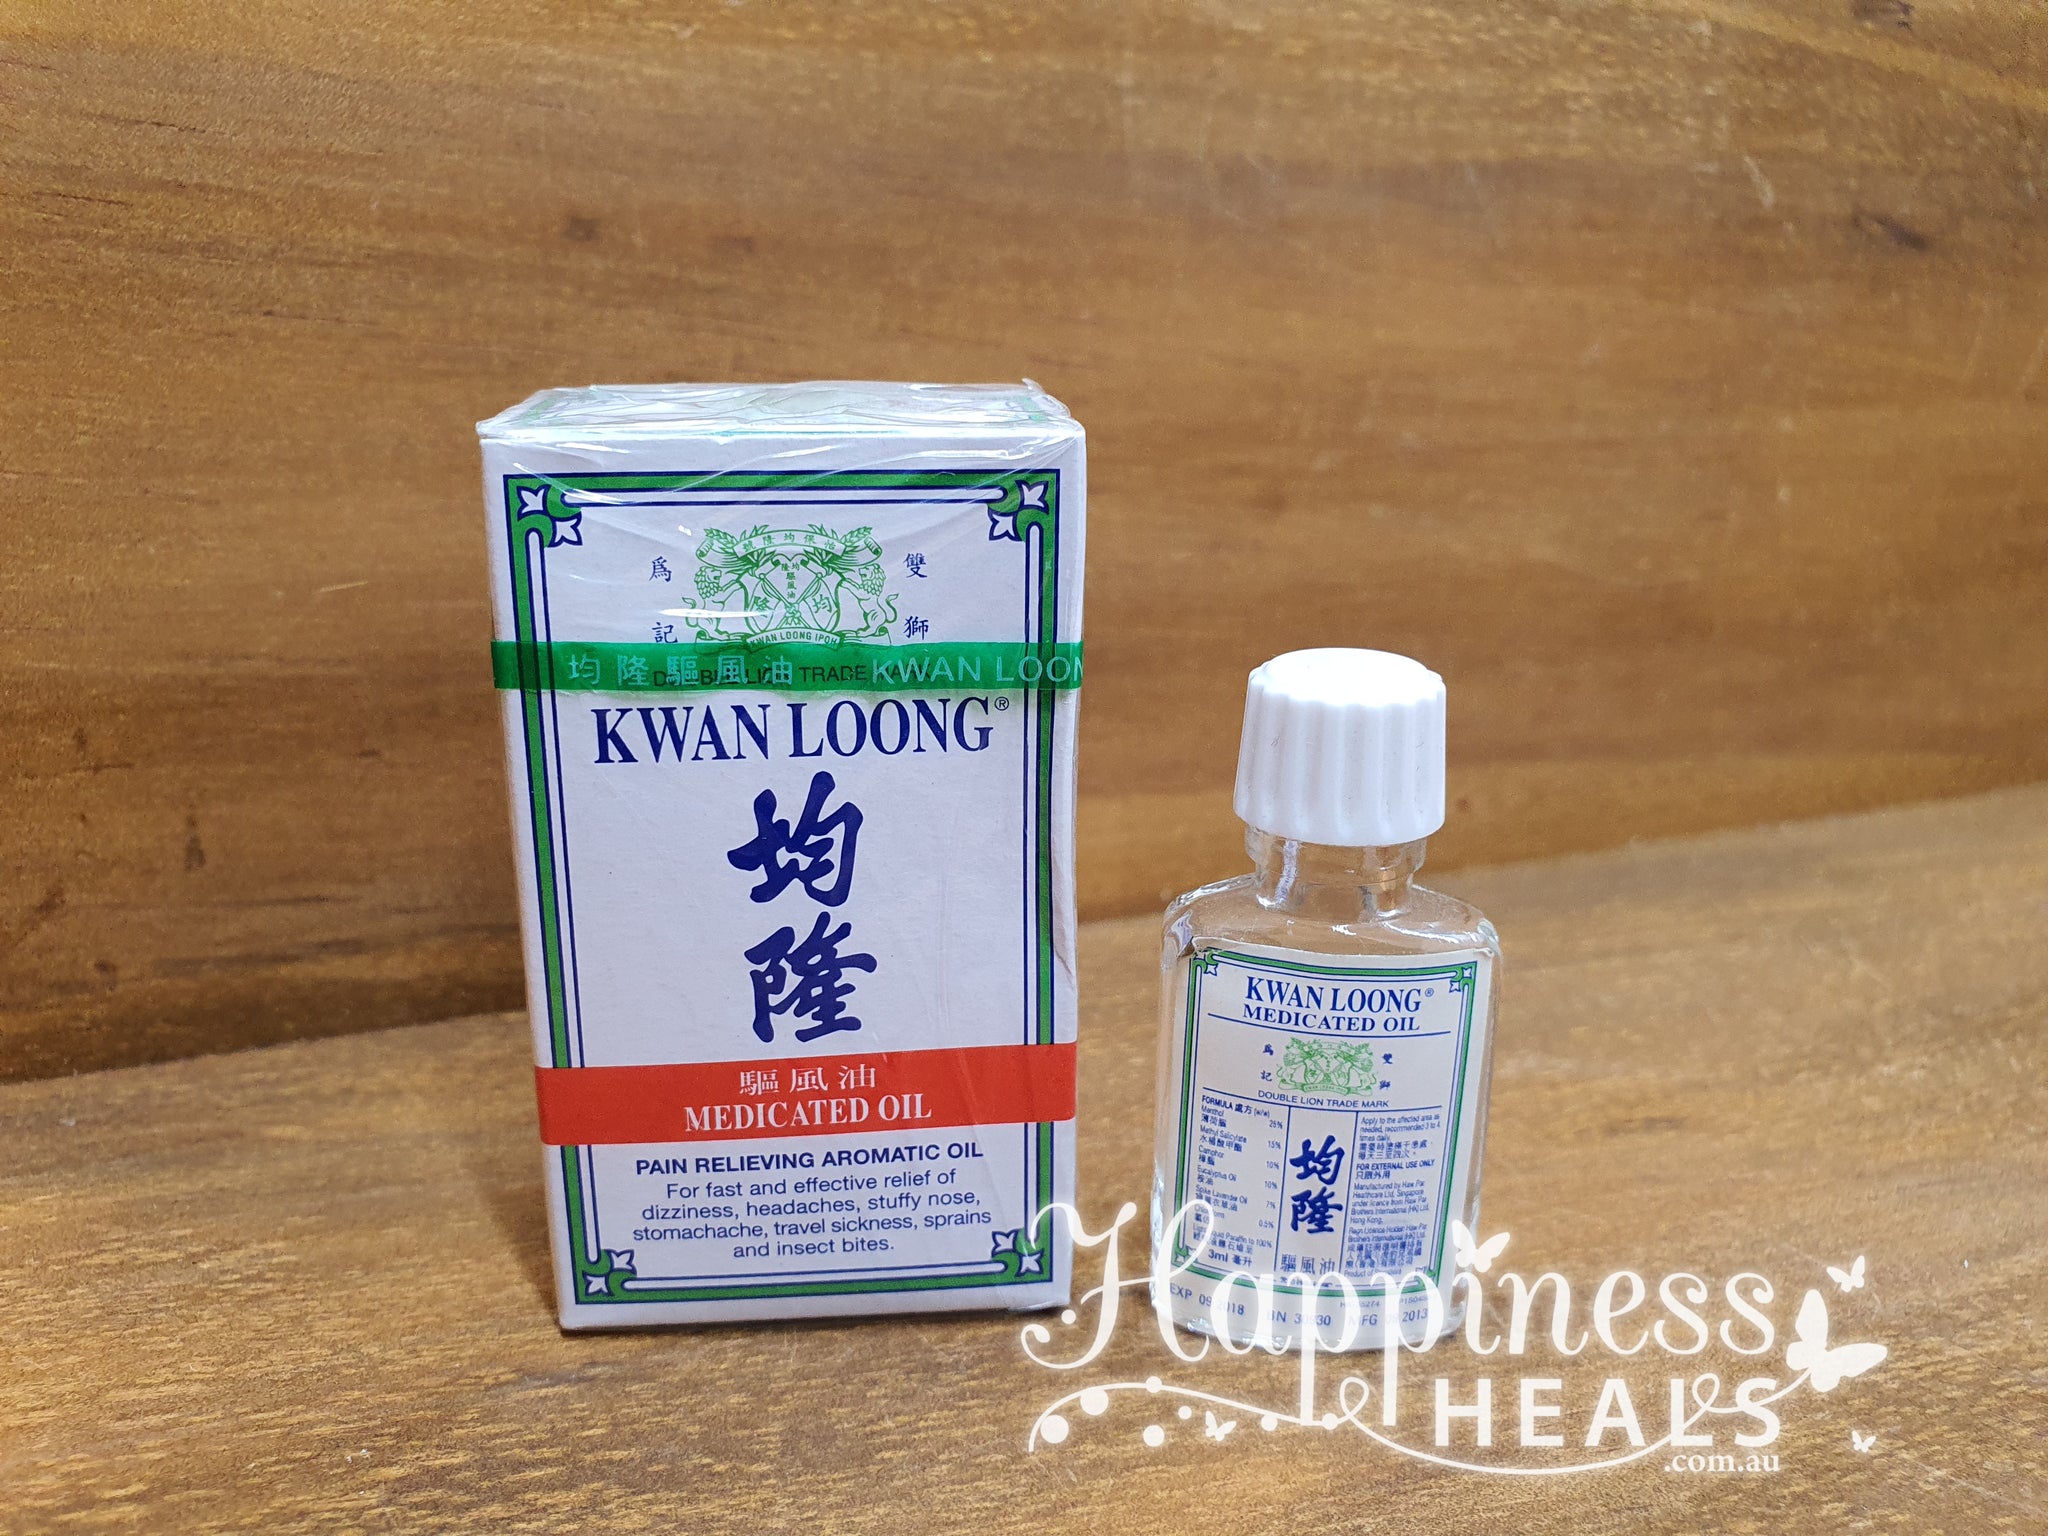 Kwan Loong Oil  Acuneeds Australia - Acupuncture & TCM Supplies